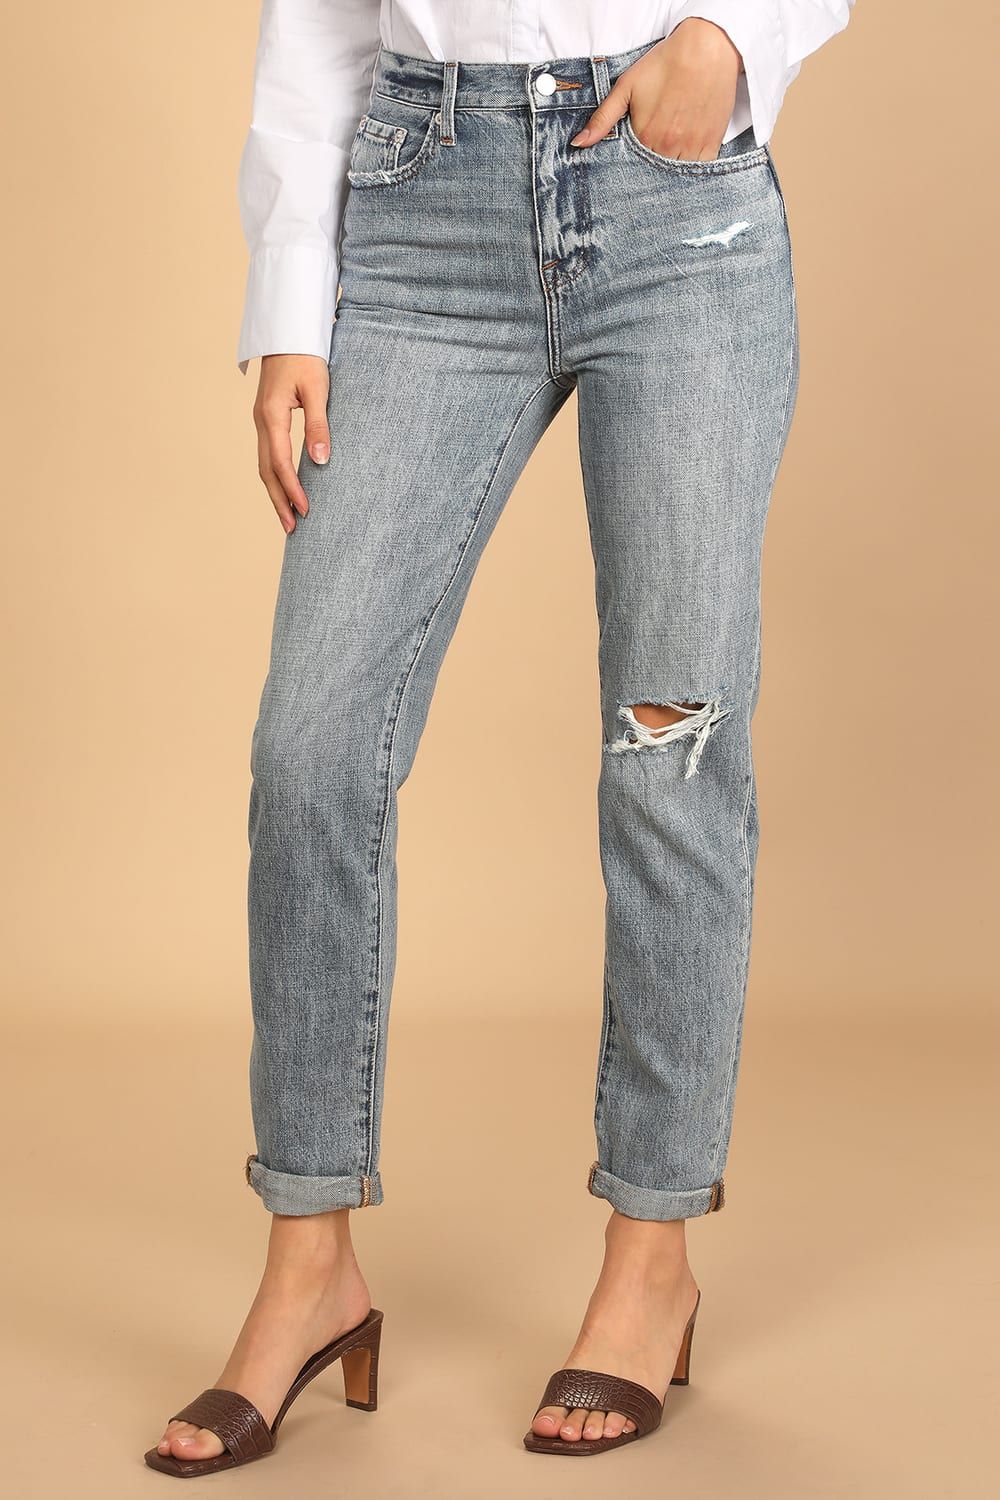 Presley '90s Roller Light Wash Faded High-Rise Distressed Jeans | Lulus (US)